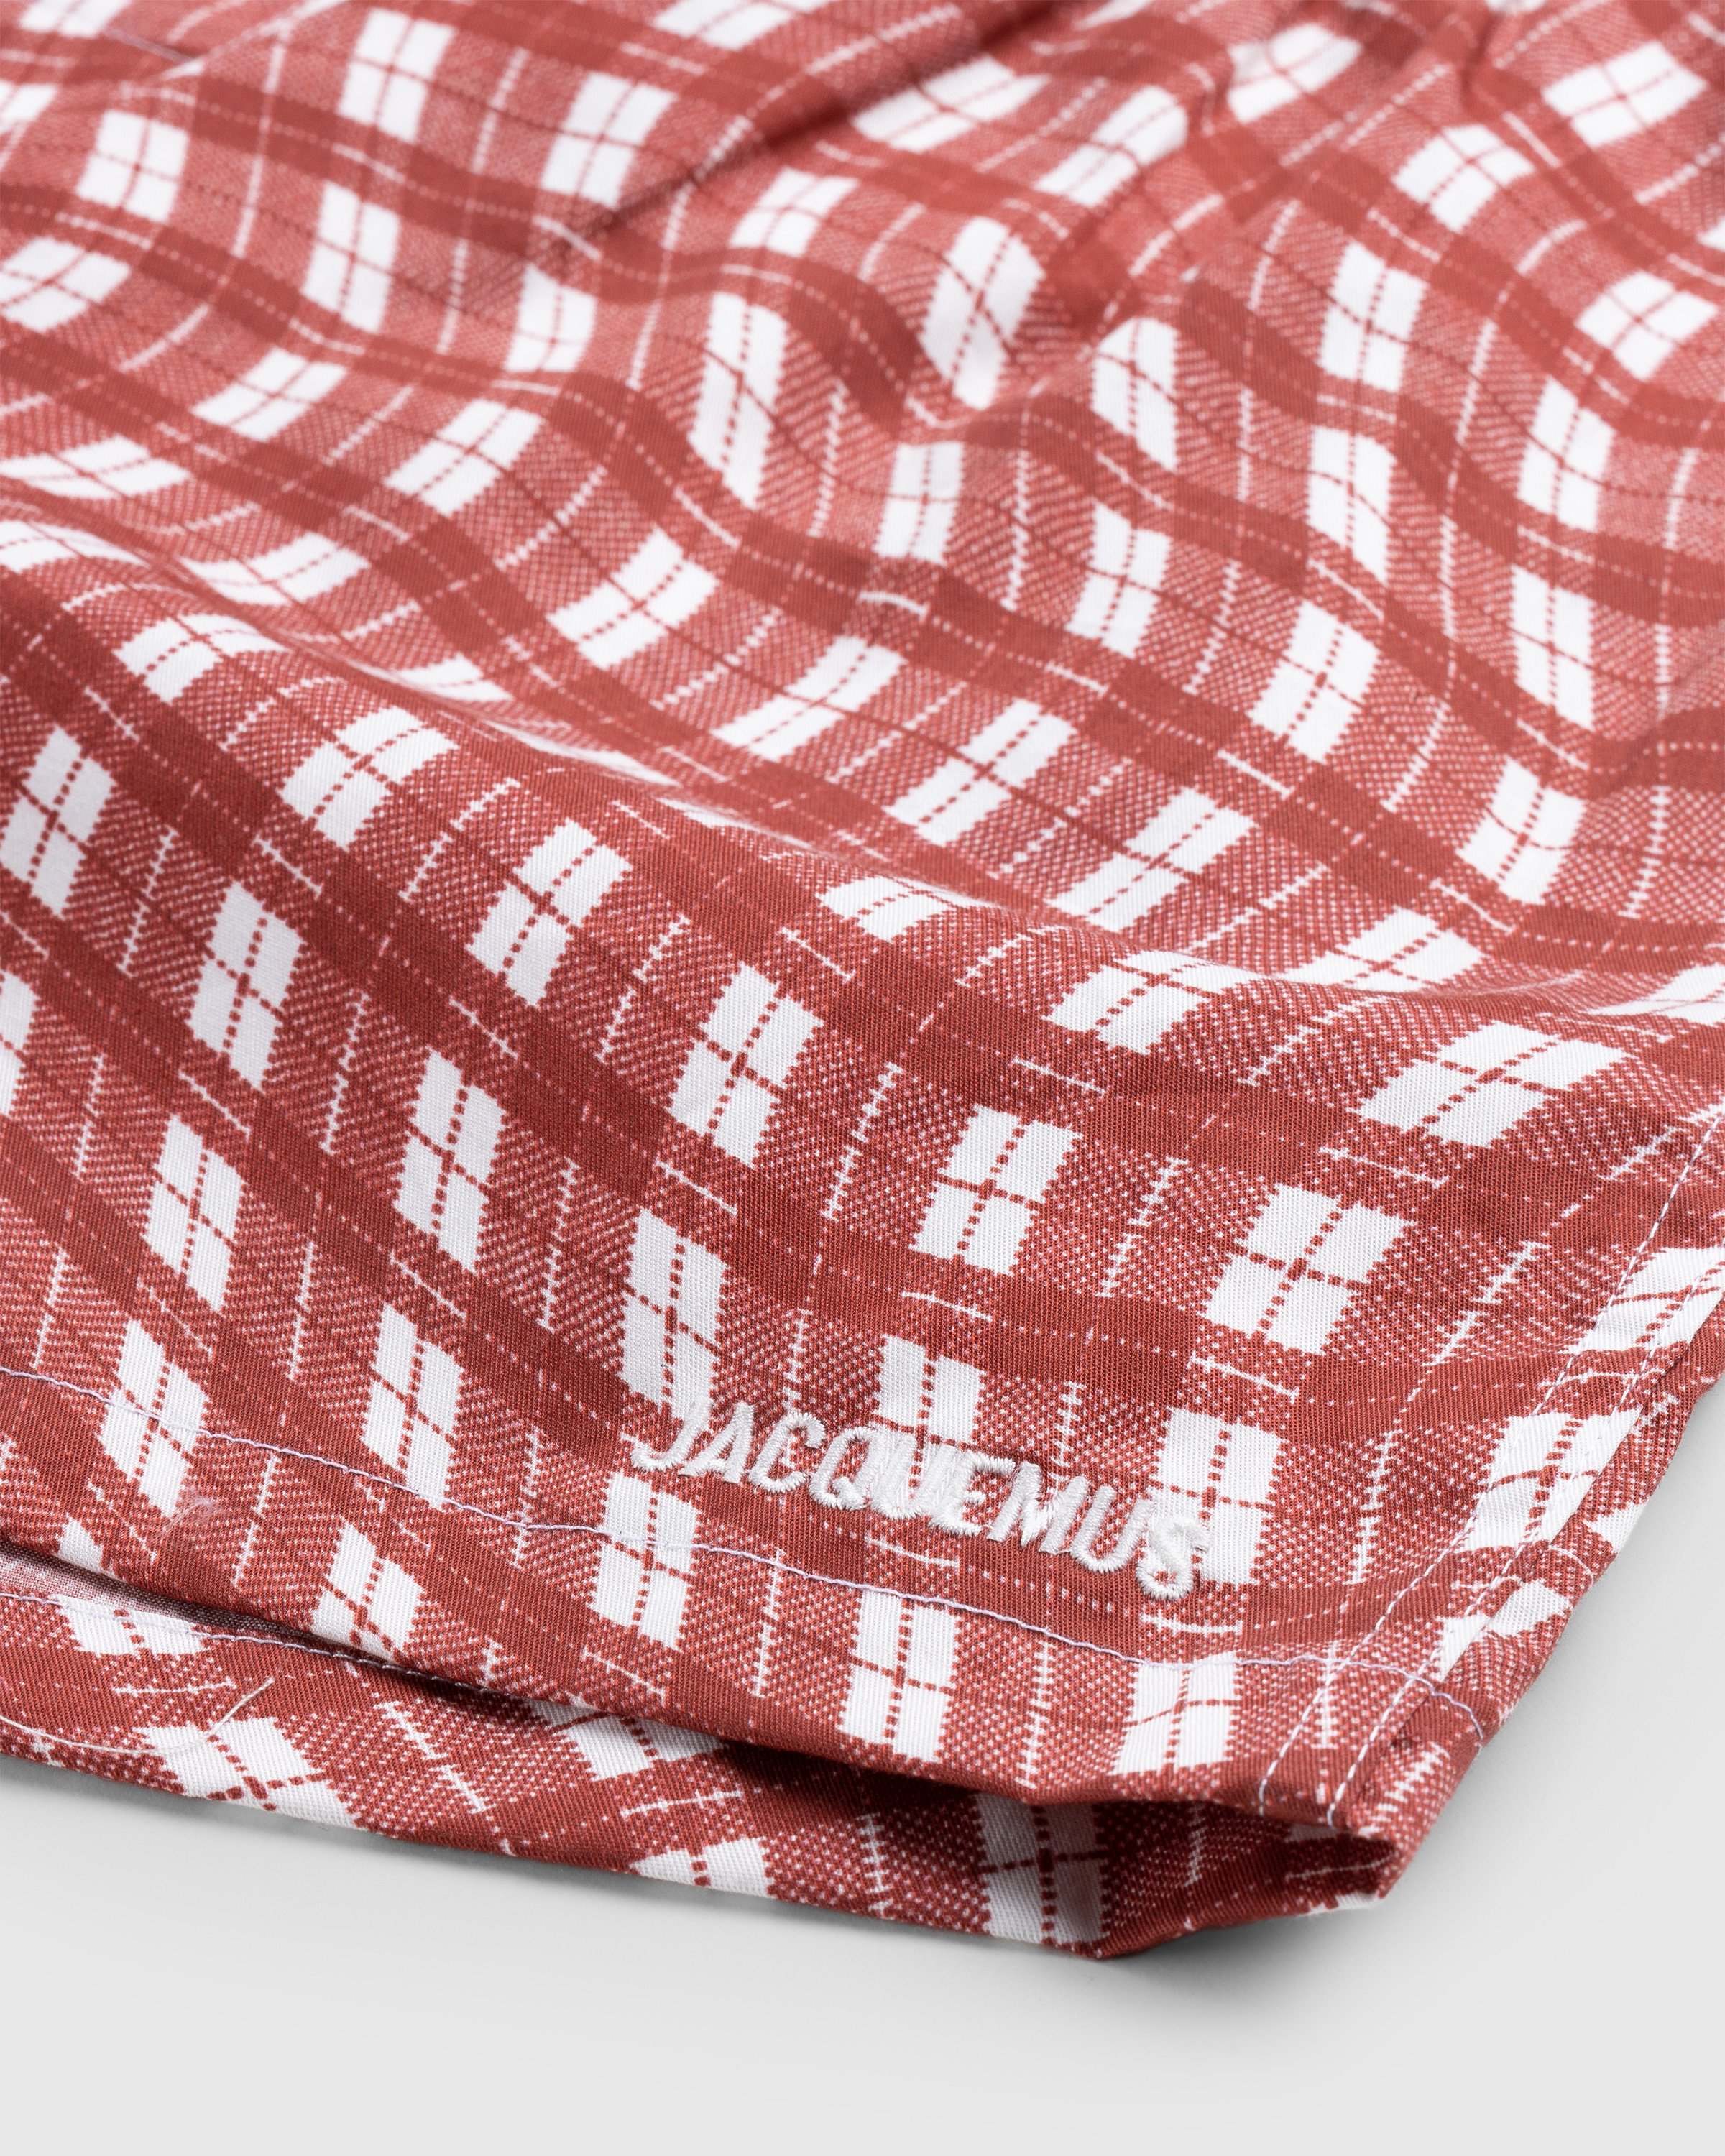 JACQUEMUS - Le Caleçon Print Dark Red Deformed Check - Clothing - Red - Image 4